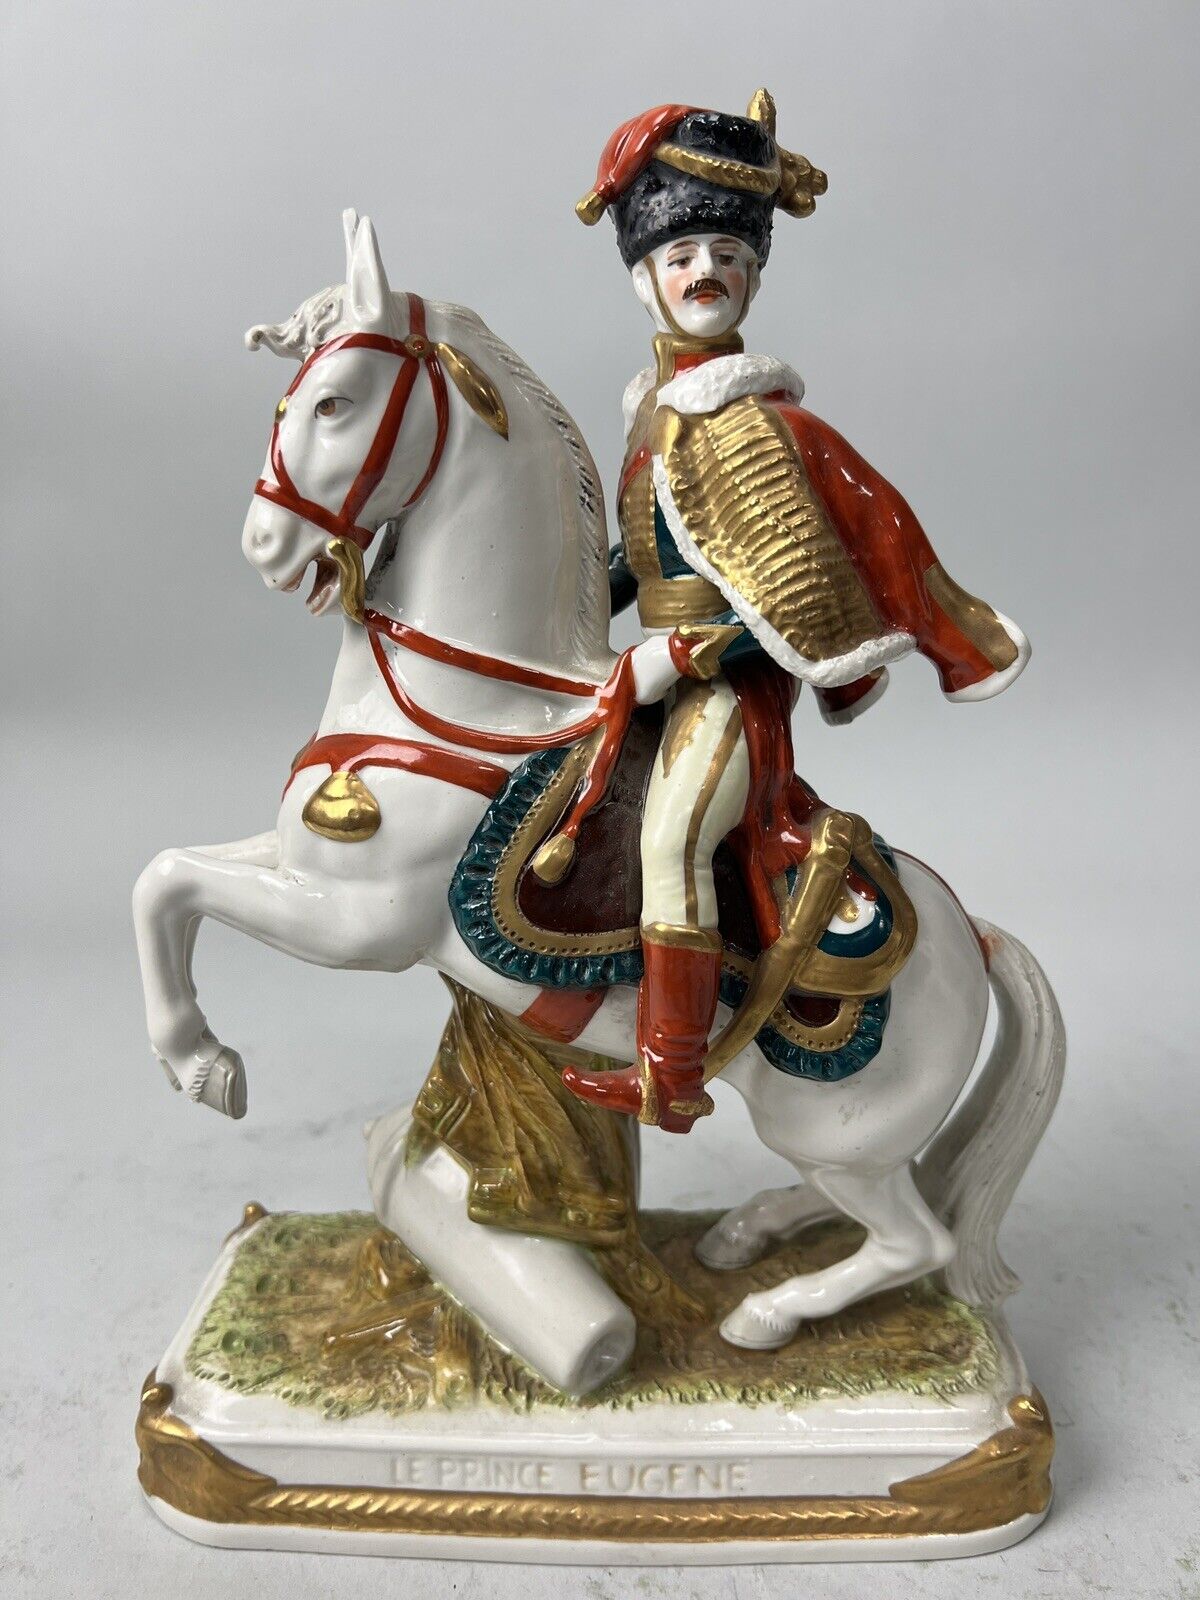 Scheibe Alsbach marked German porcelain Napoleon le prince eugene statue rare